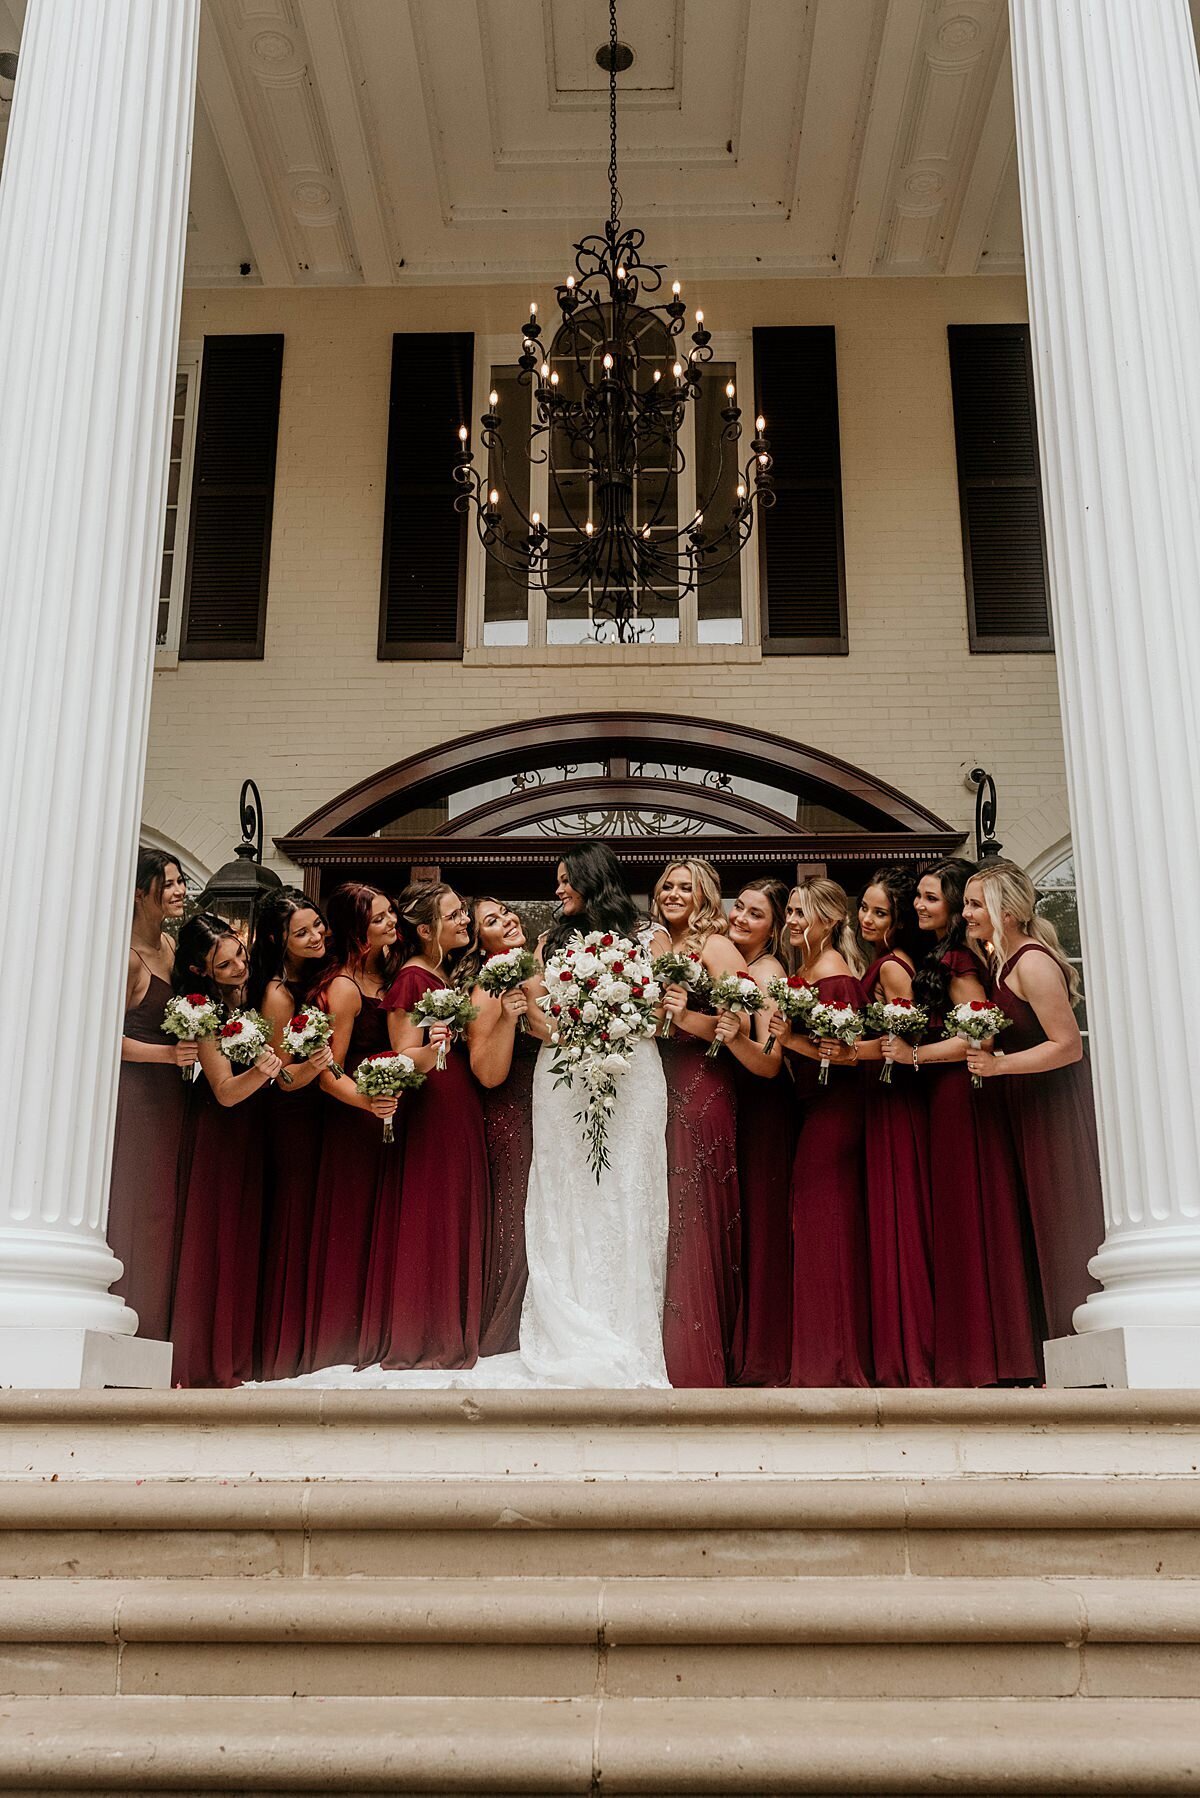 A bride, holding a large white cascade bouquet stands between her bridesmaids dressed in burgundy dresses as they stand on the steps of the mansion at The estate at Cherokee Dock.